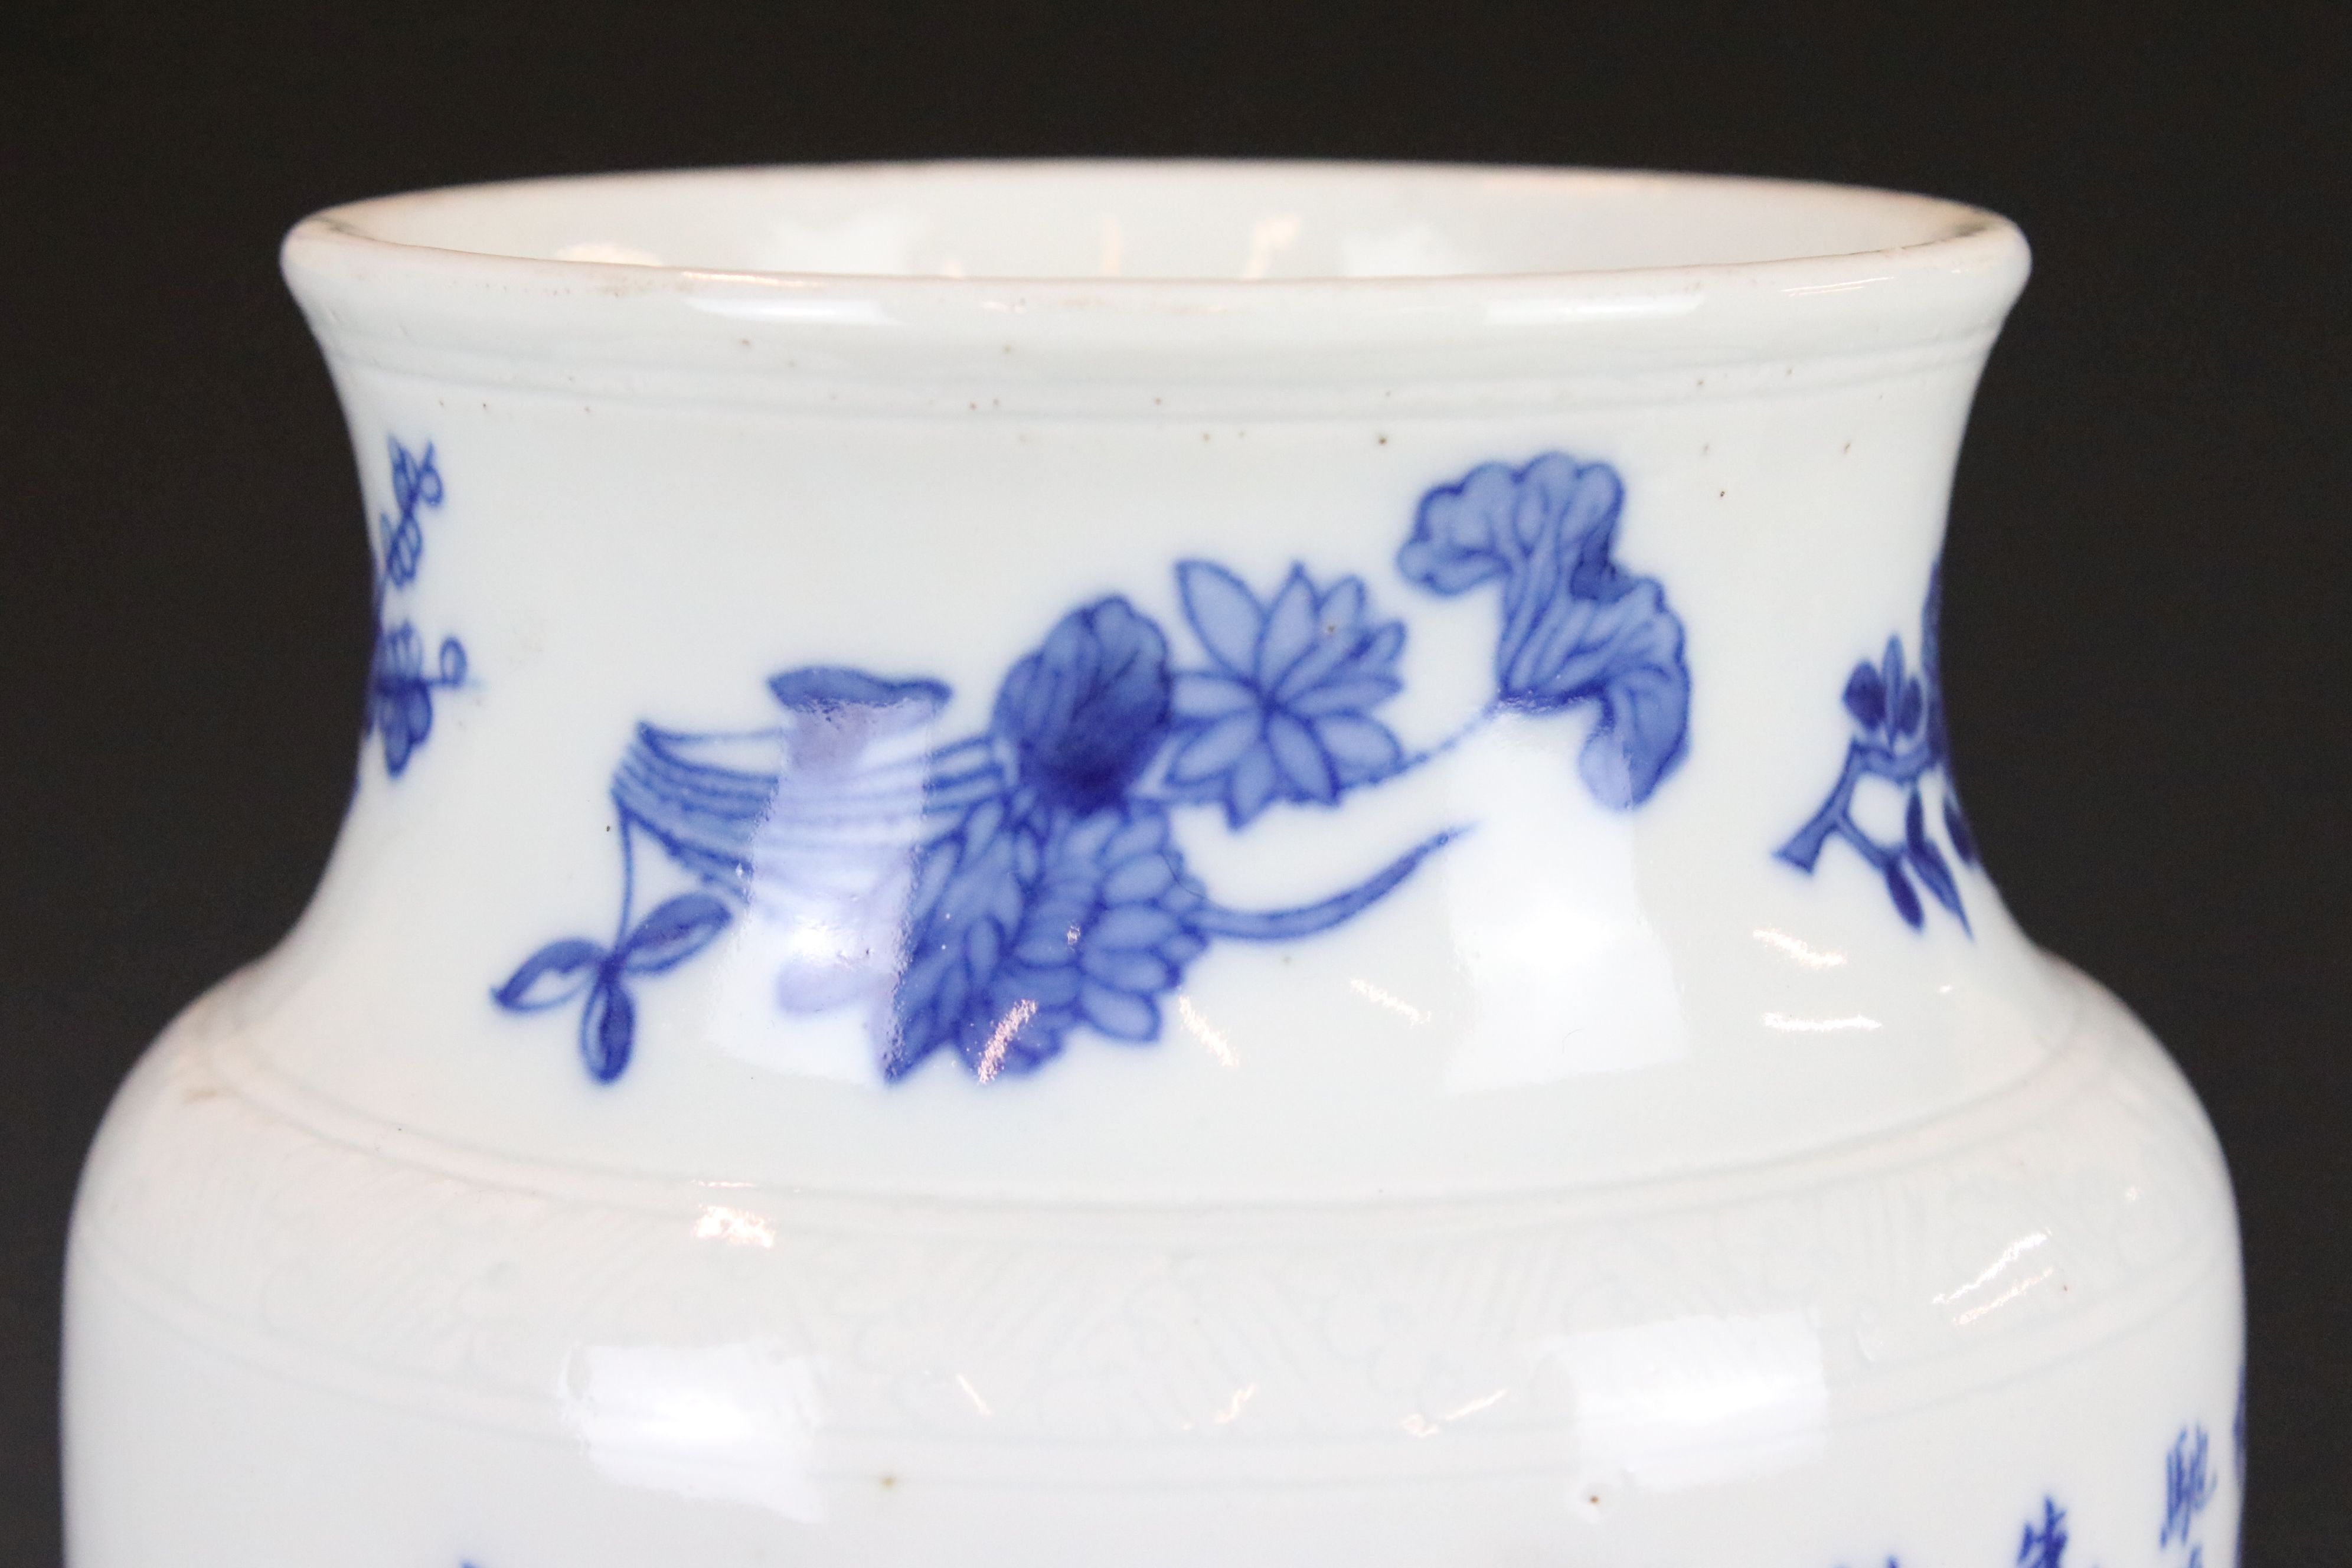 Chinese Porcelain Vase, the body all over decorated with columns of cobalt blue characters or - Image 4 of 11